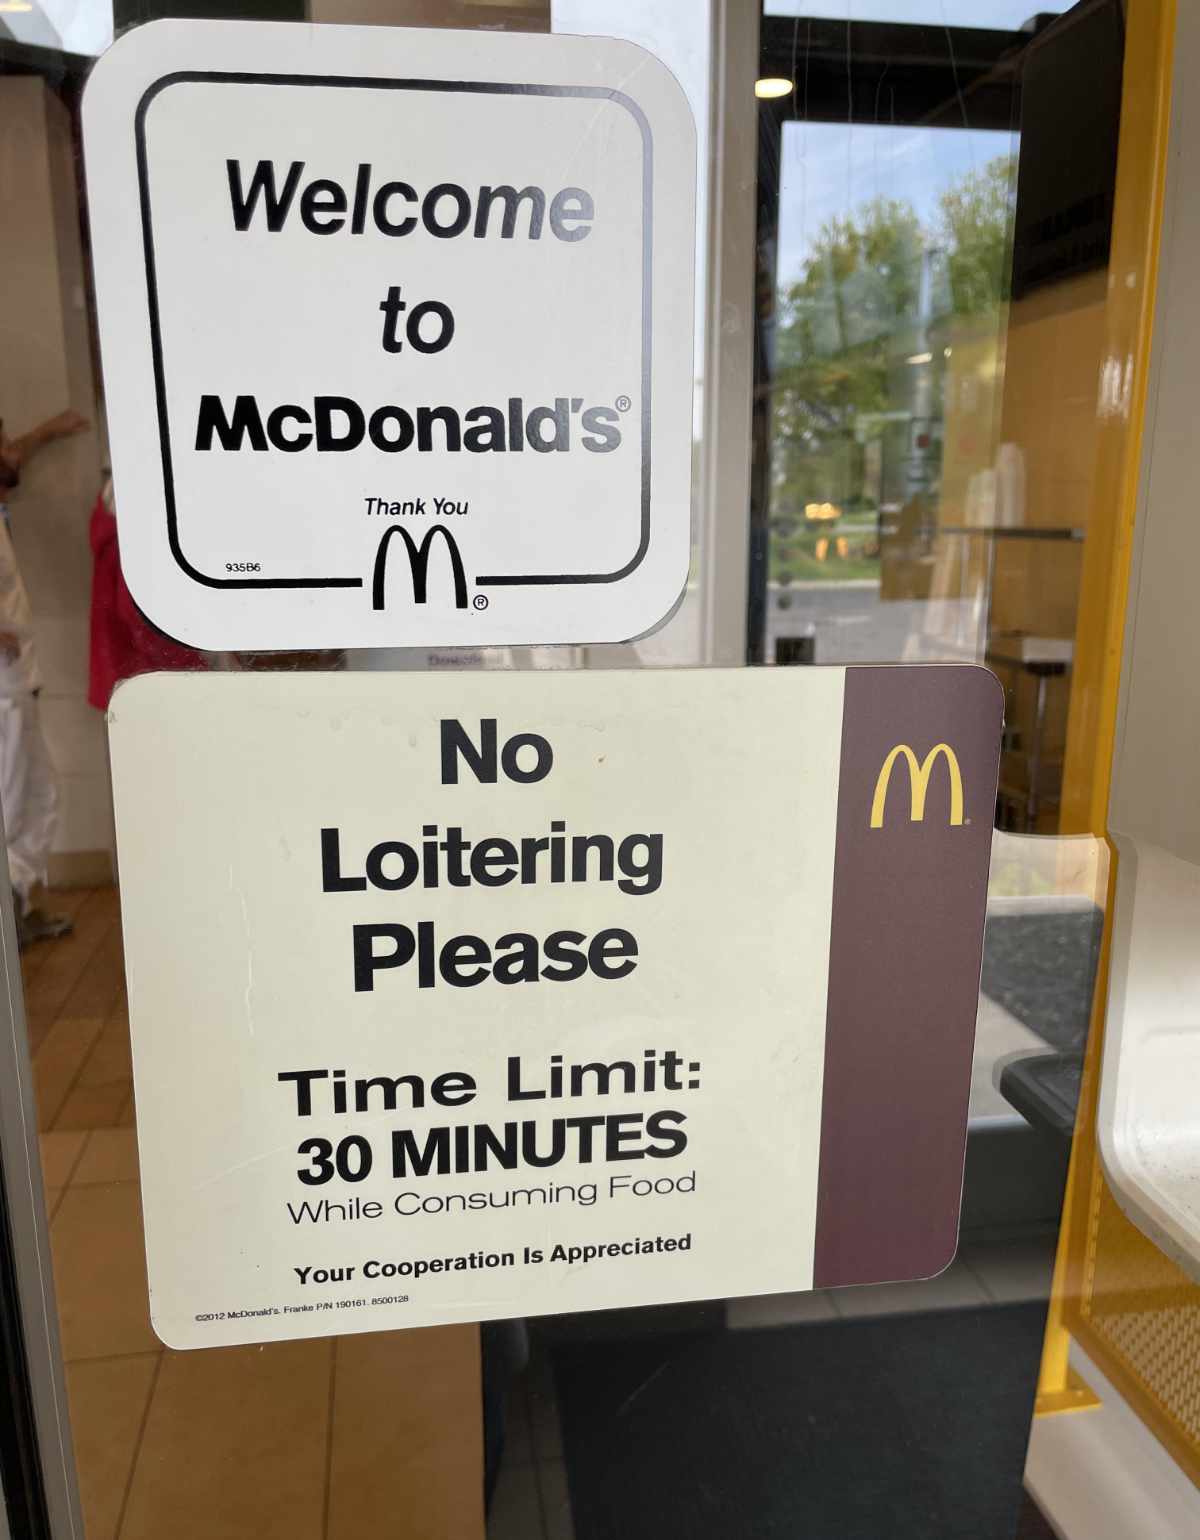 Welcome to McDonalds, please leave